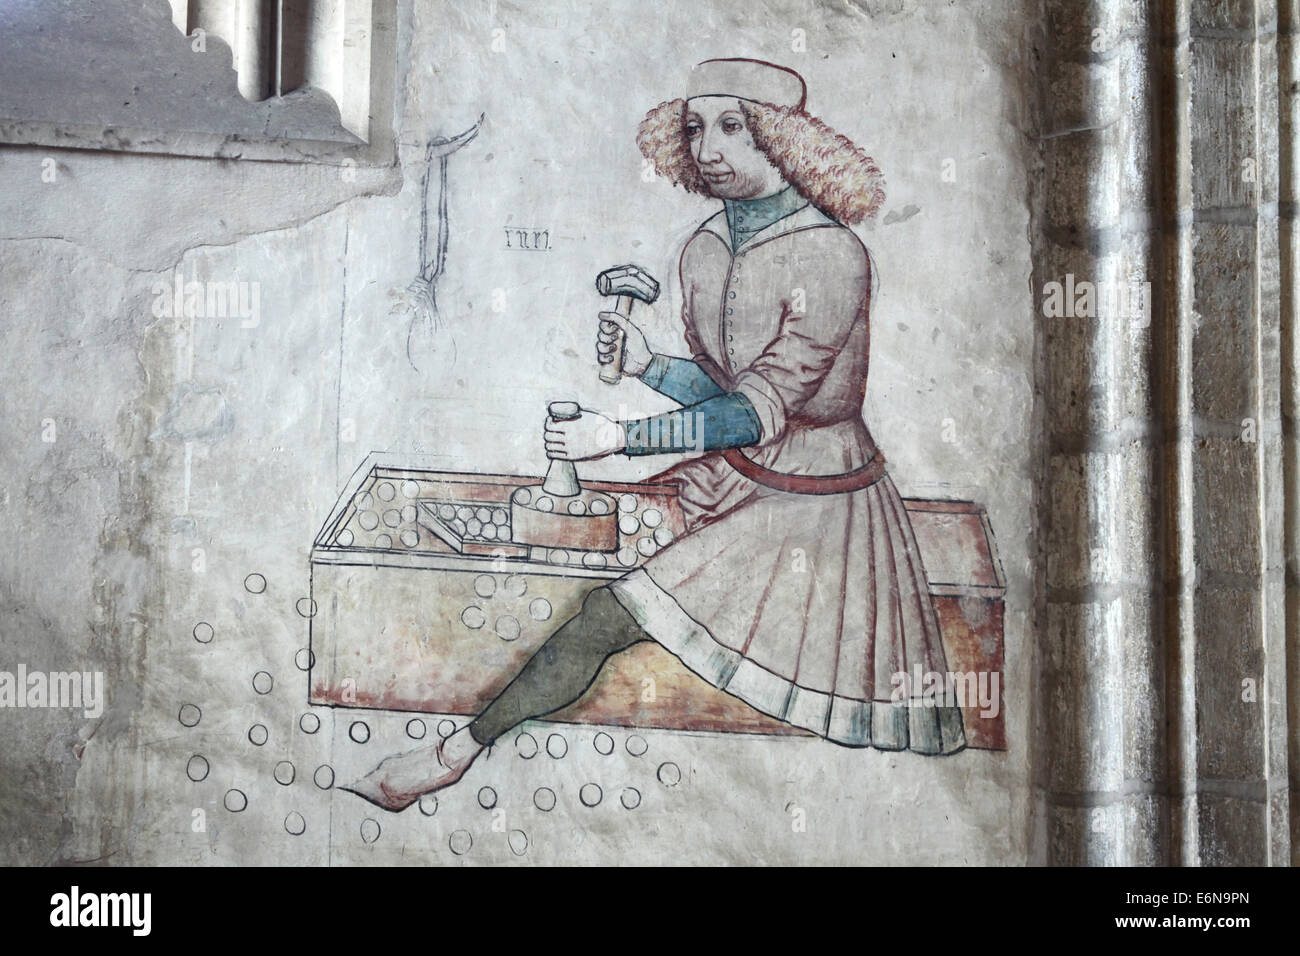 Medieval coin minting depicted on the Late Gothic fresco in St Barbara's Church in Kutna Hora, Czech Republic. Stock Photo